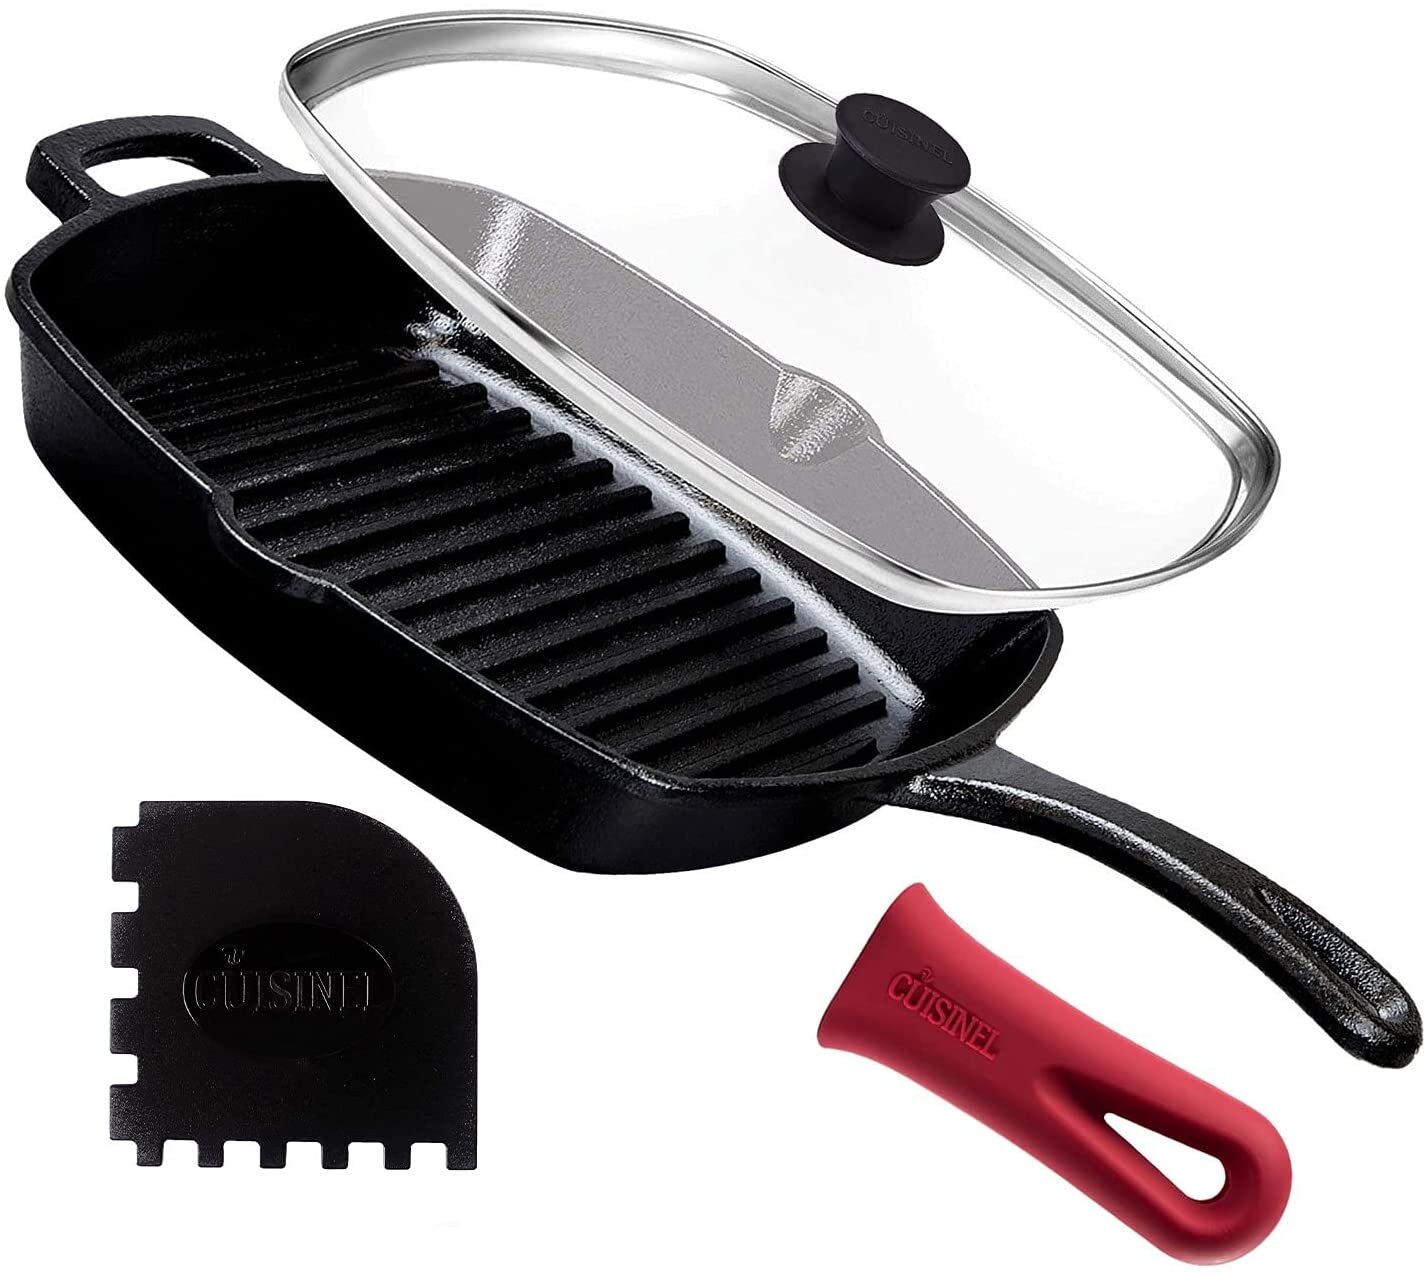 Cuisinel Cast Iron Skillet Set - 10 + 12-Inch Frying Pan + Glass